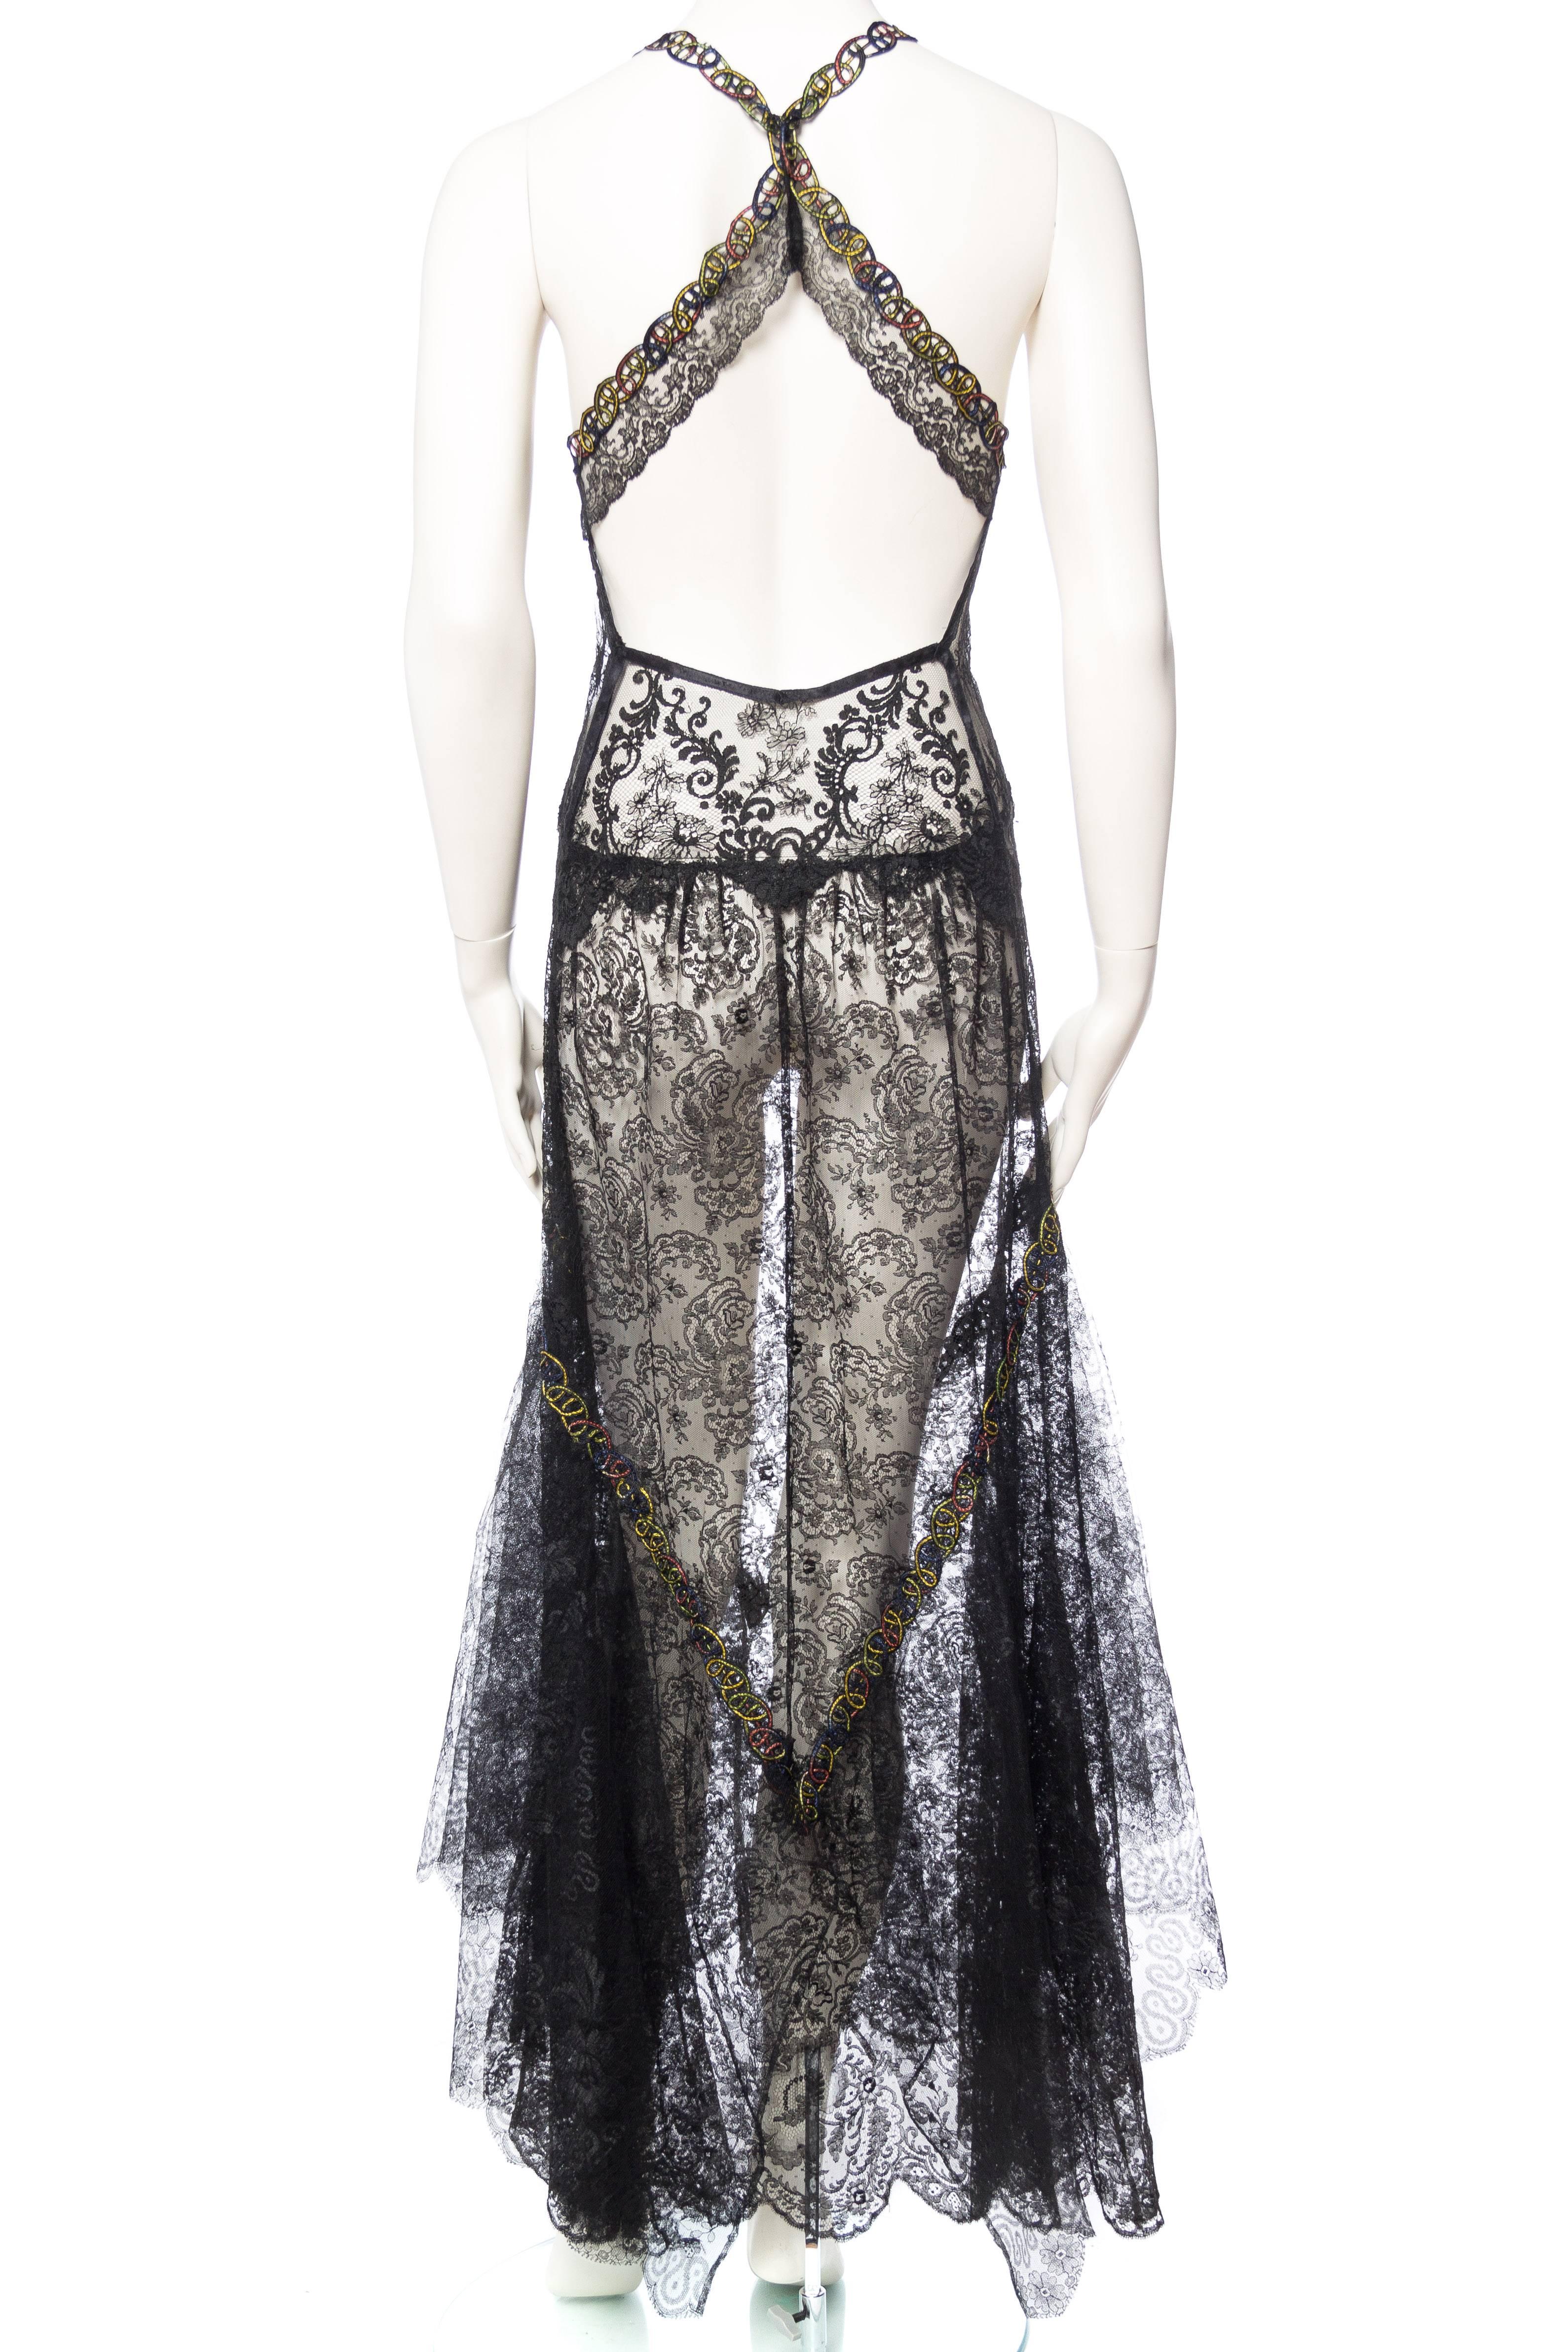 Women's Backless Dress in Sheer Victorian Lace with 1920s Beaded Details